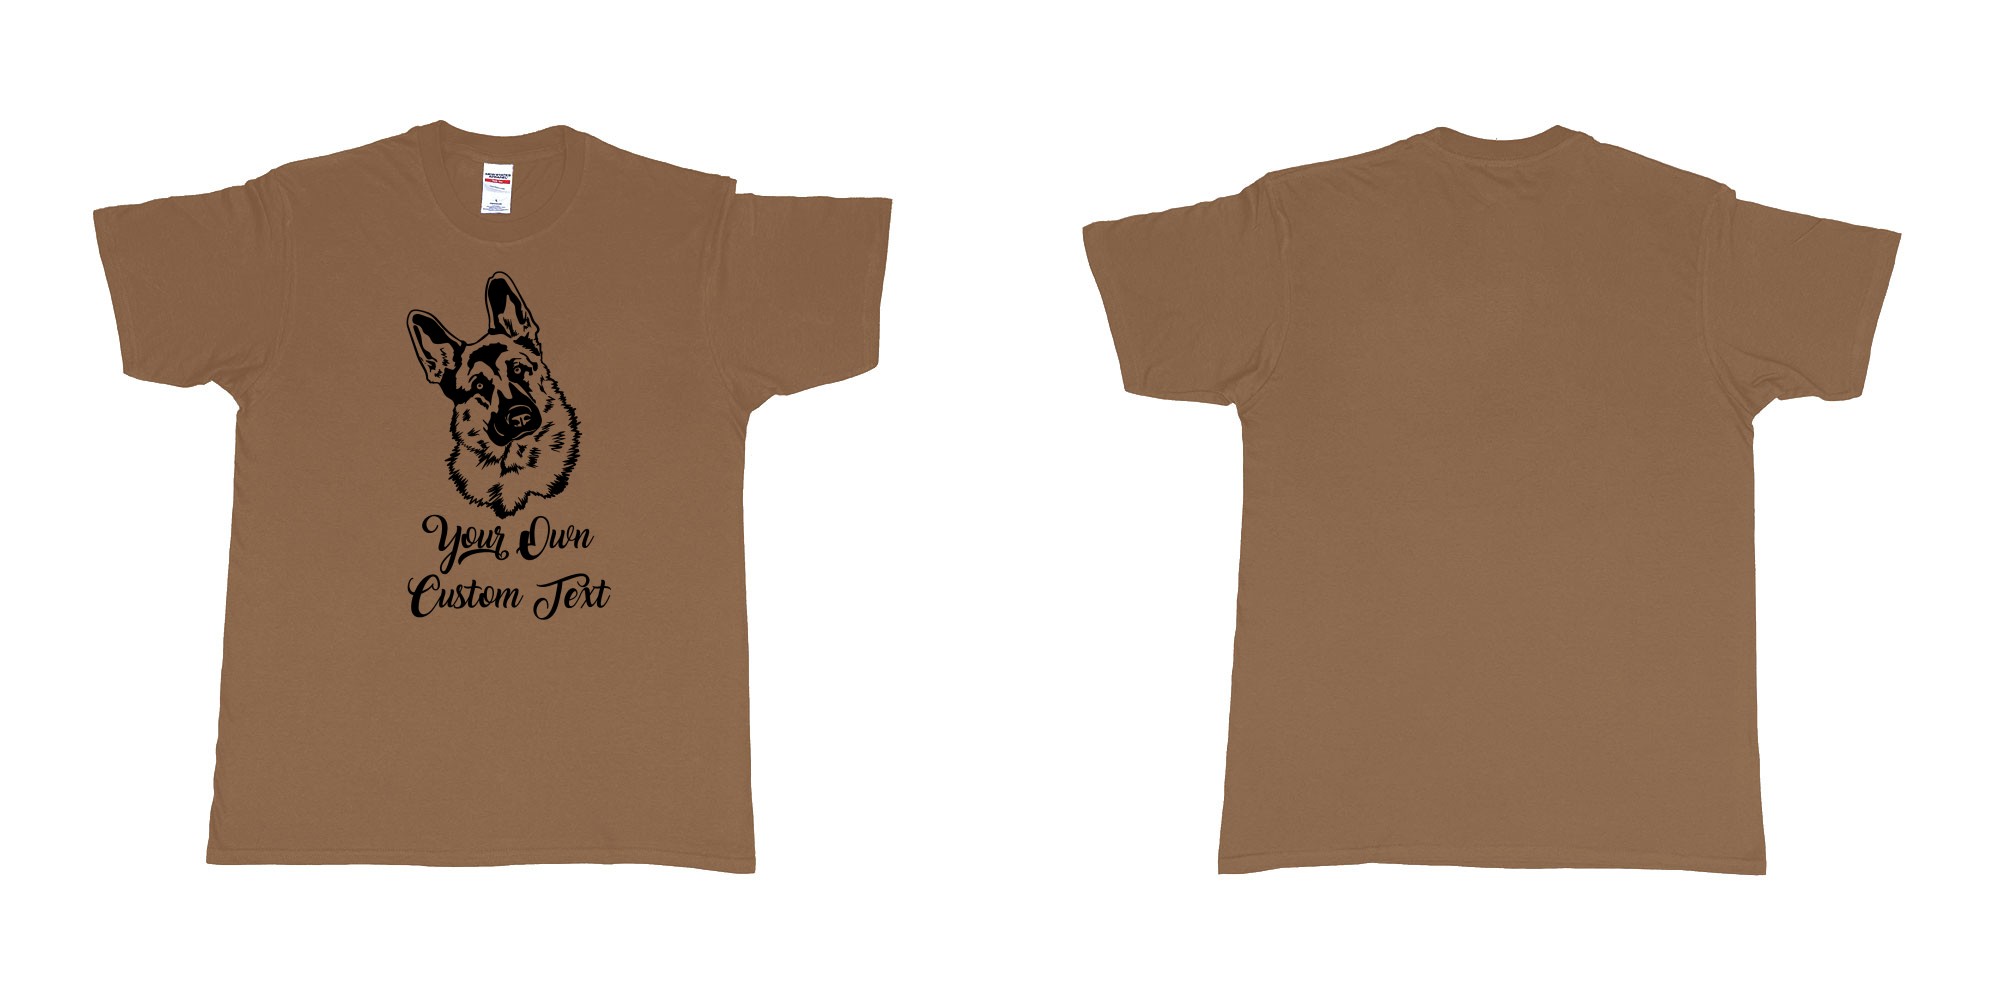 Custom tshirt design zack german shepherd tilts its head your own custom text in fabric color chestnut choice your own text made in Bali by The Pirate Way